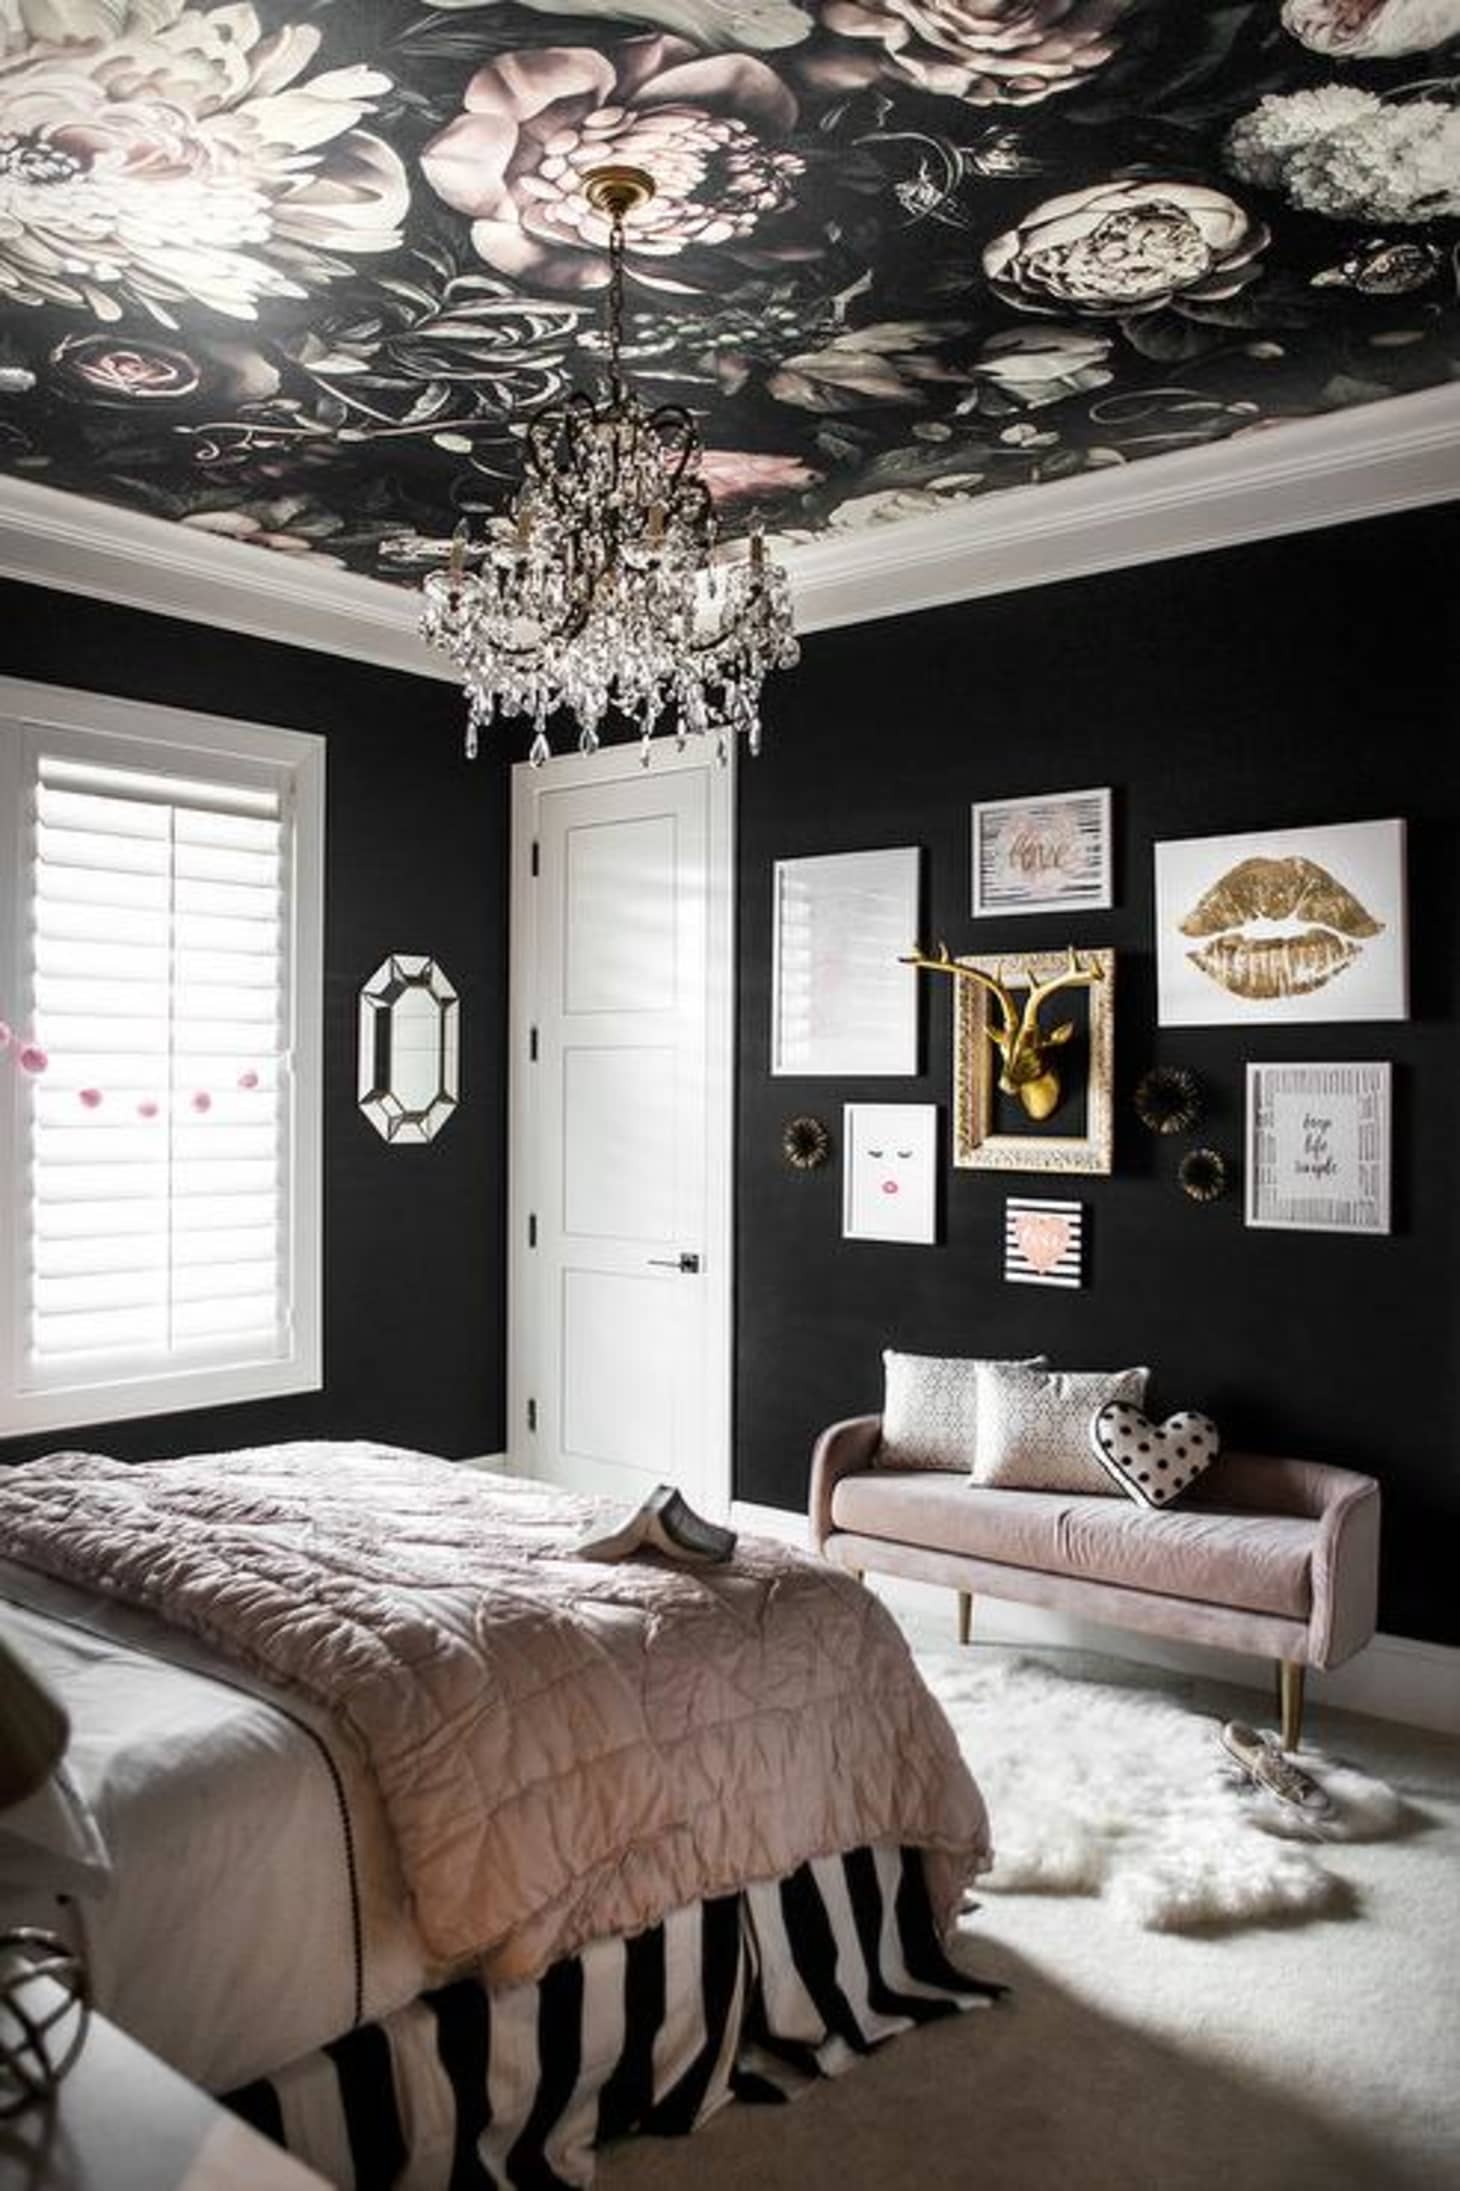 Beautiful Black Painted Rooms - Black Room Ideas | Apartment Therapy